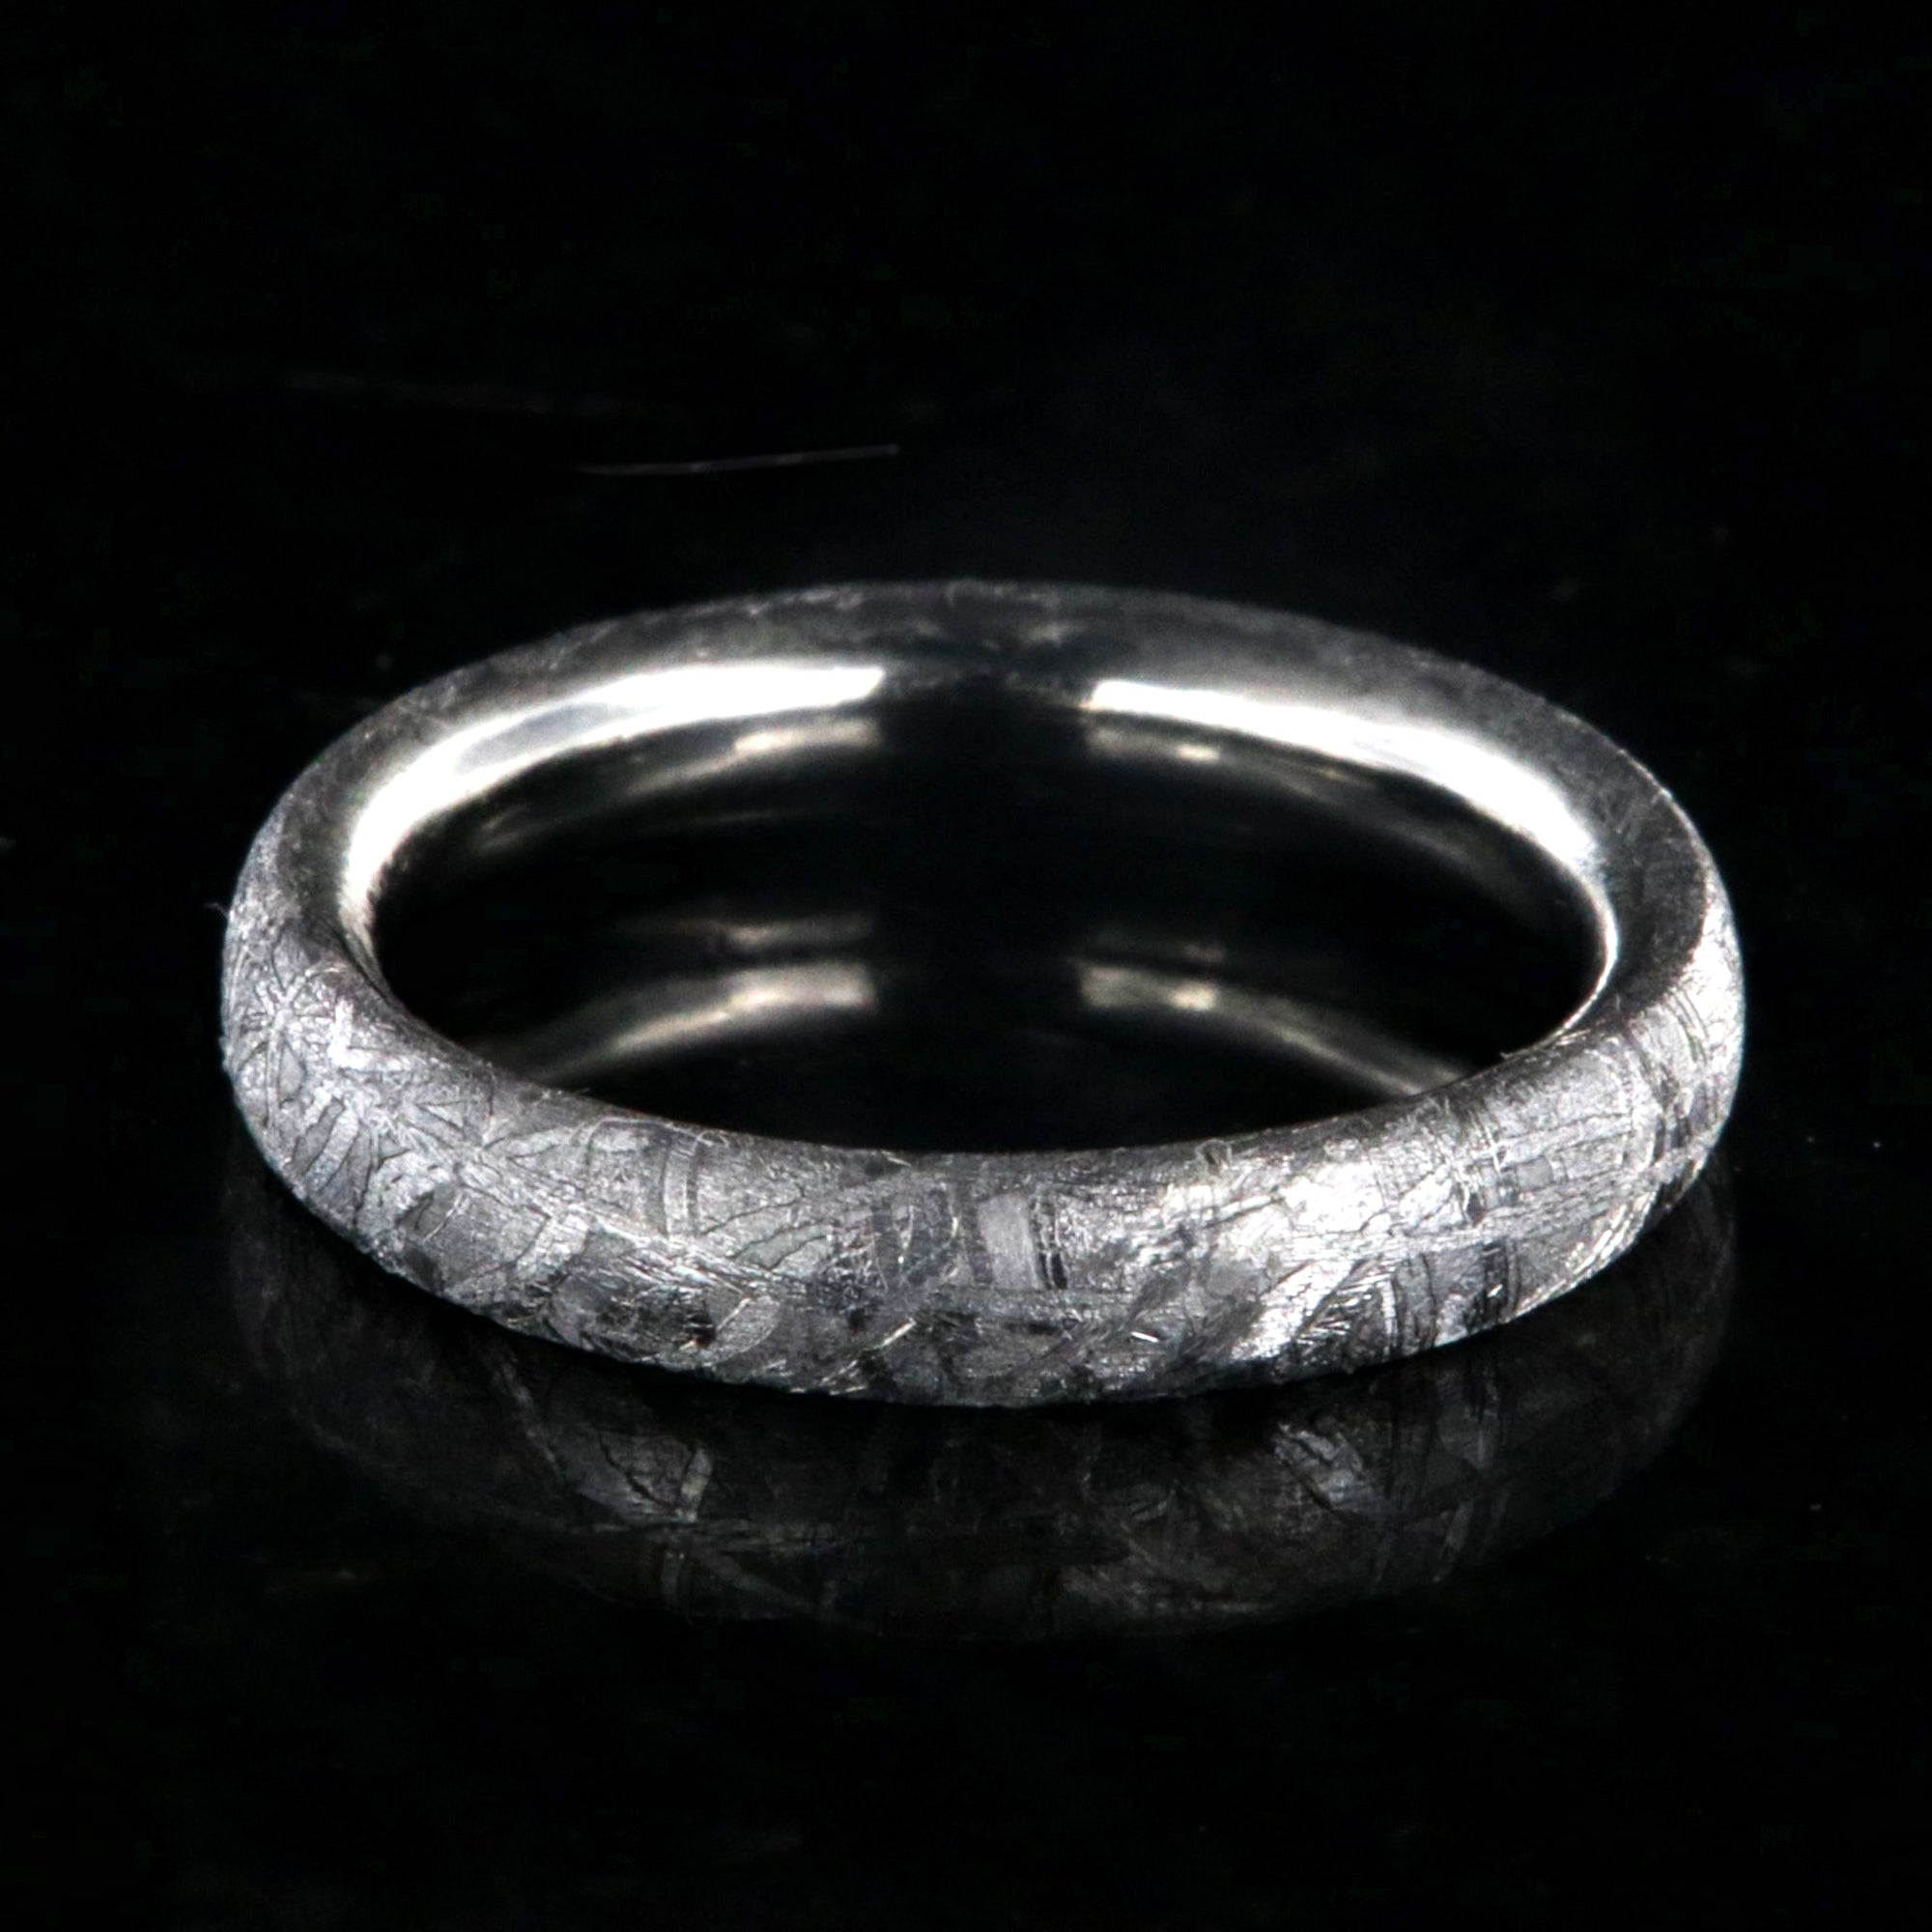 3mm wide women's meteorite ring with rounded profile